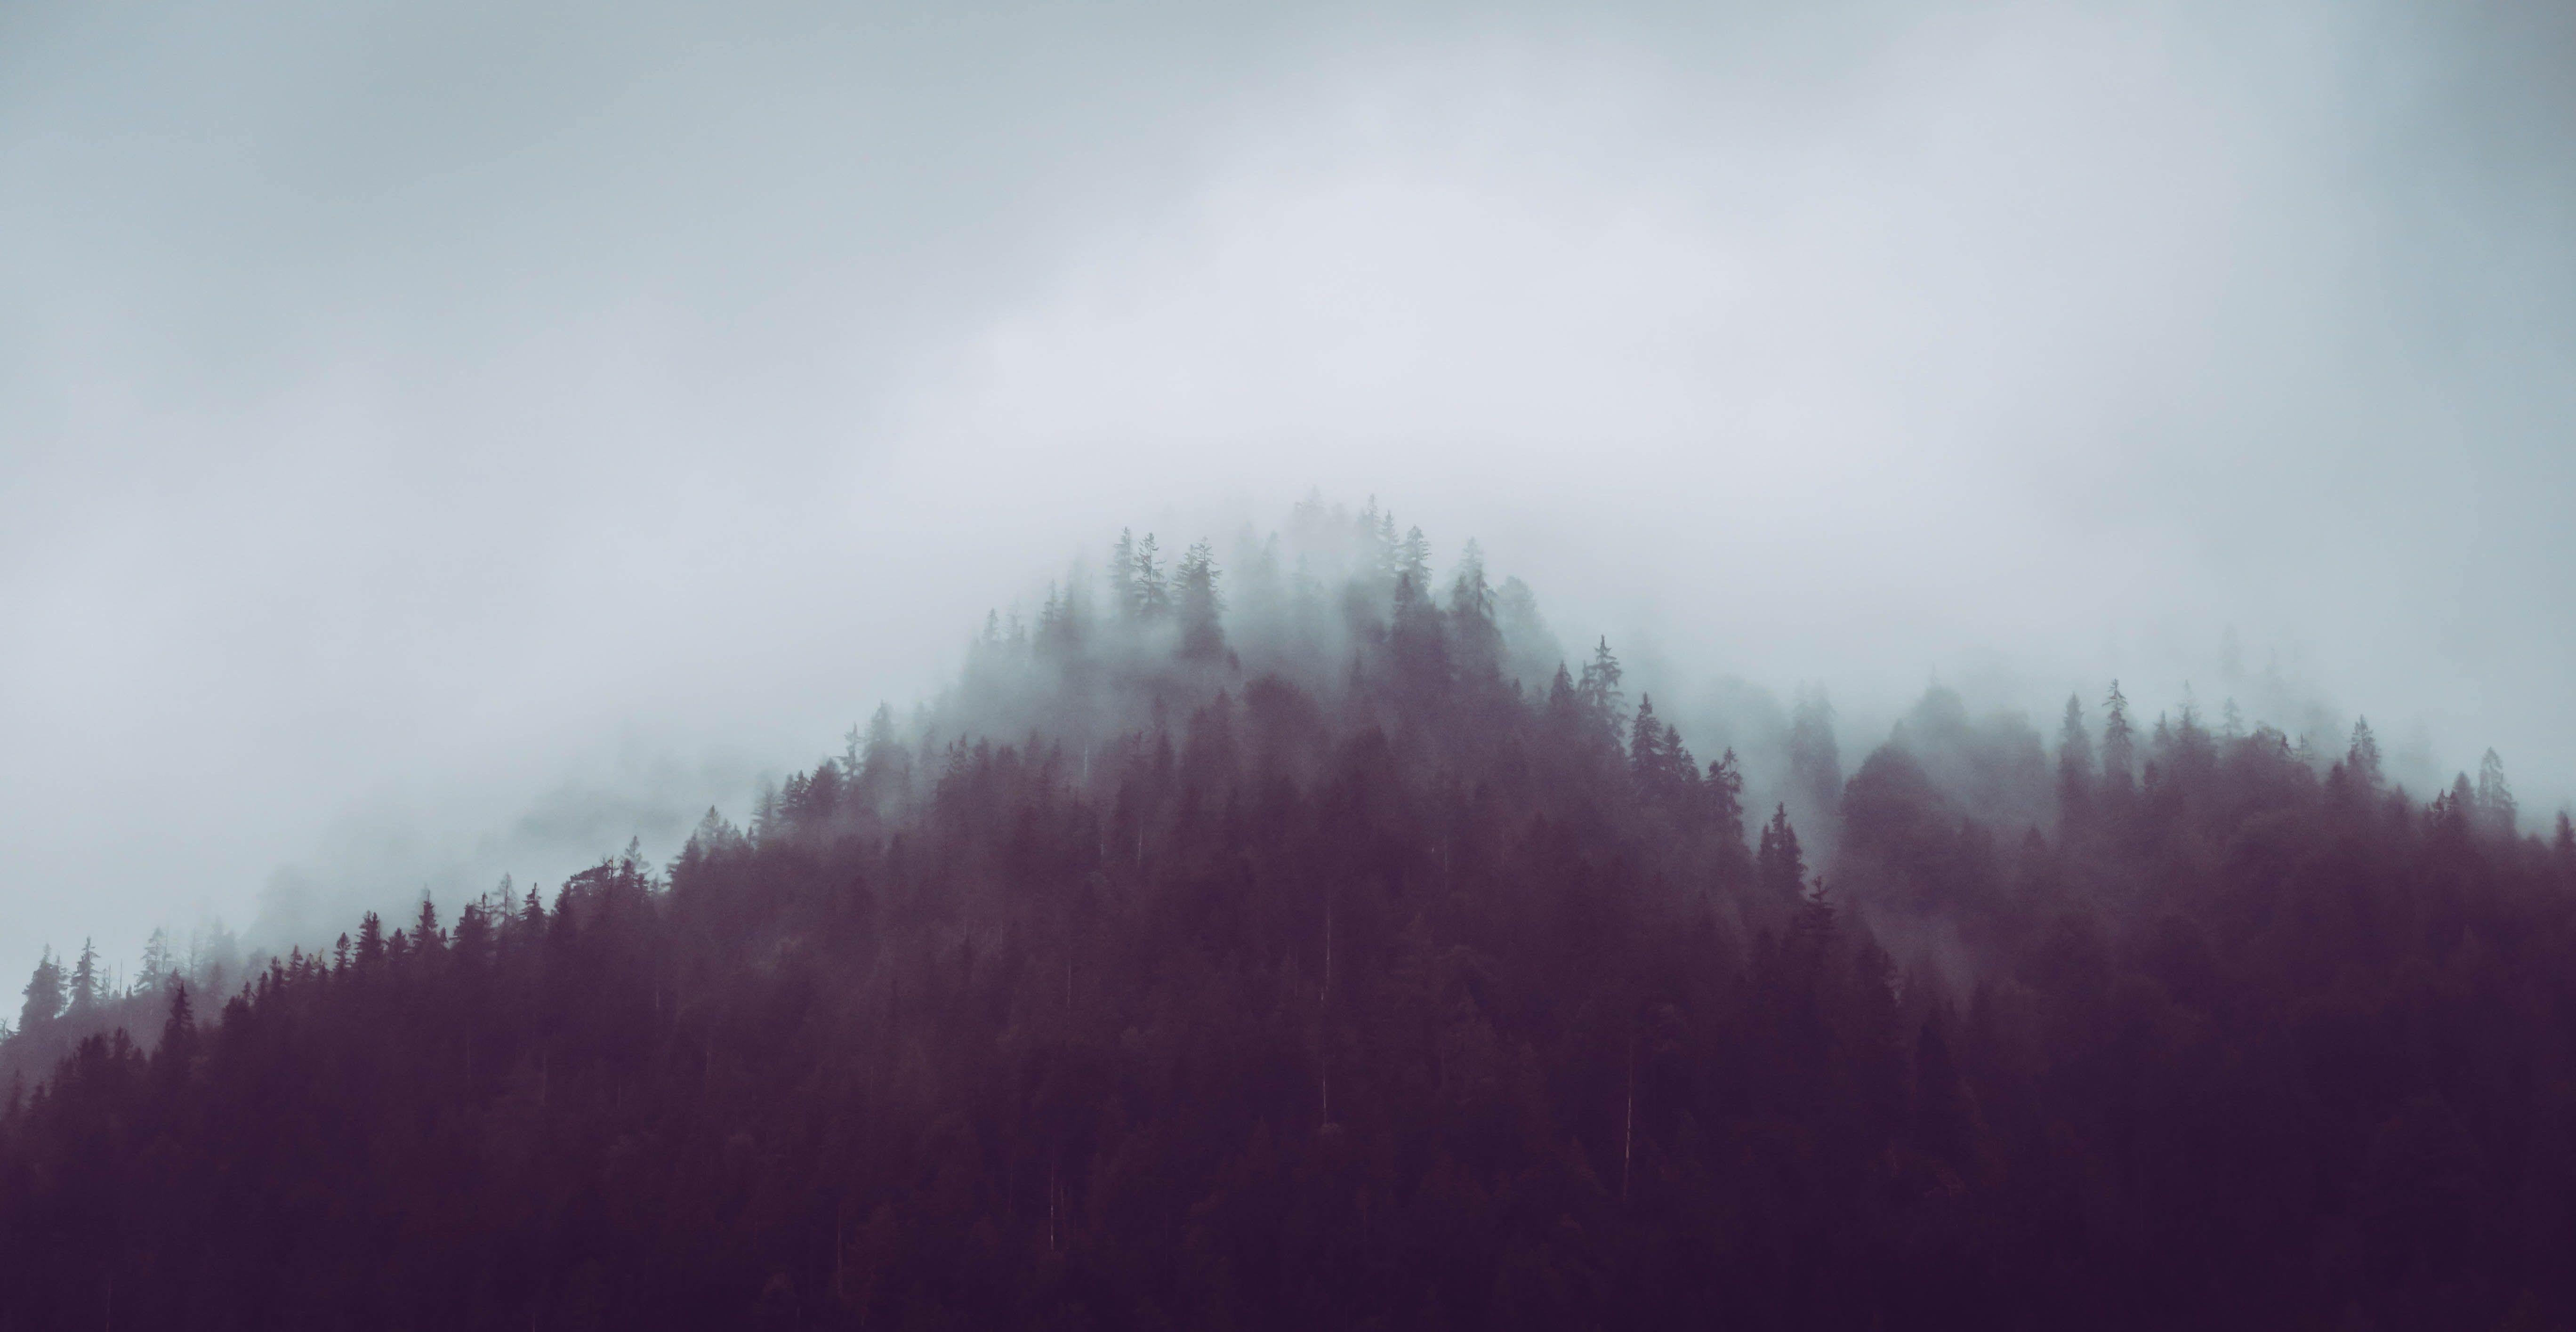 A foggy forest with a mountain in the background. - Foggy forest